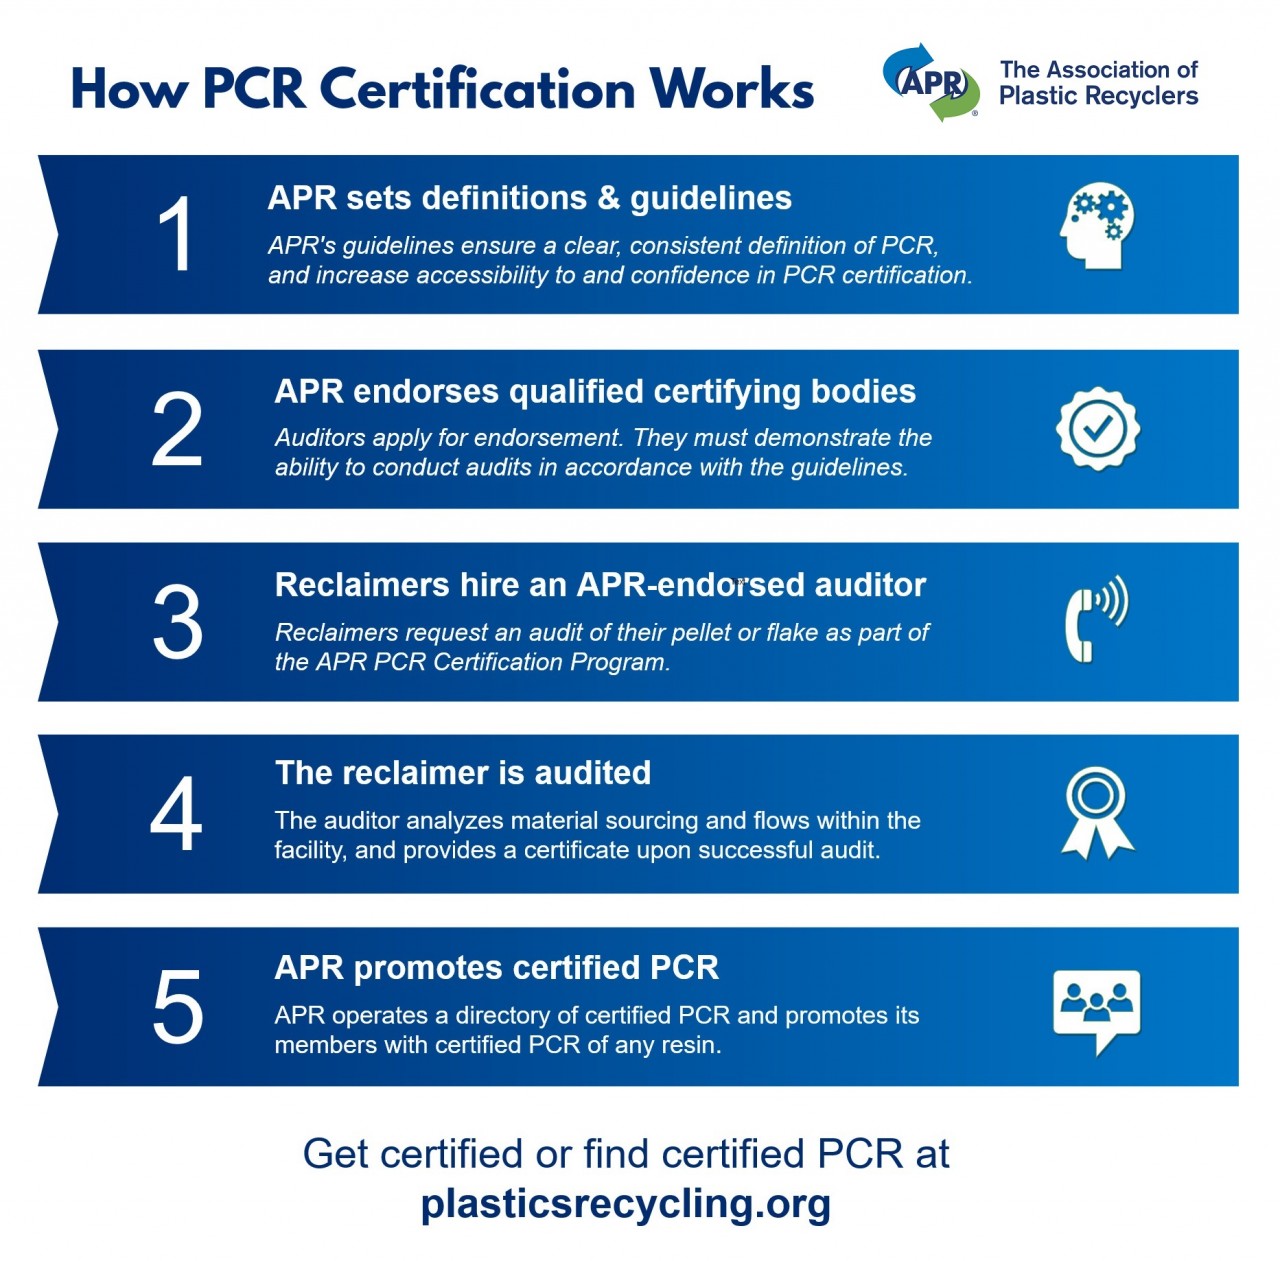 How PCR Certification Works: 1. APR sets definitions and guidelines. 2. APR endorses qualified certifying bodies. 3. Reclaimers hire an APR endorsed auditor. 4. The reclaimer is audited. 5. APR promotes certified PCR.